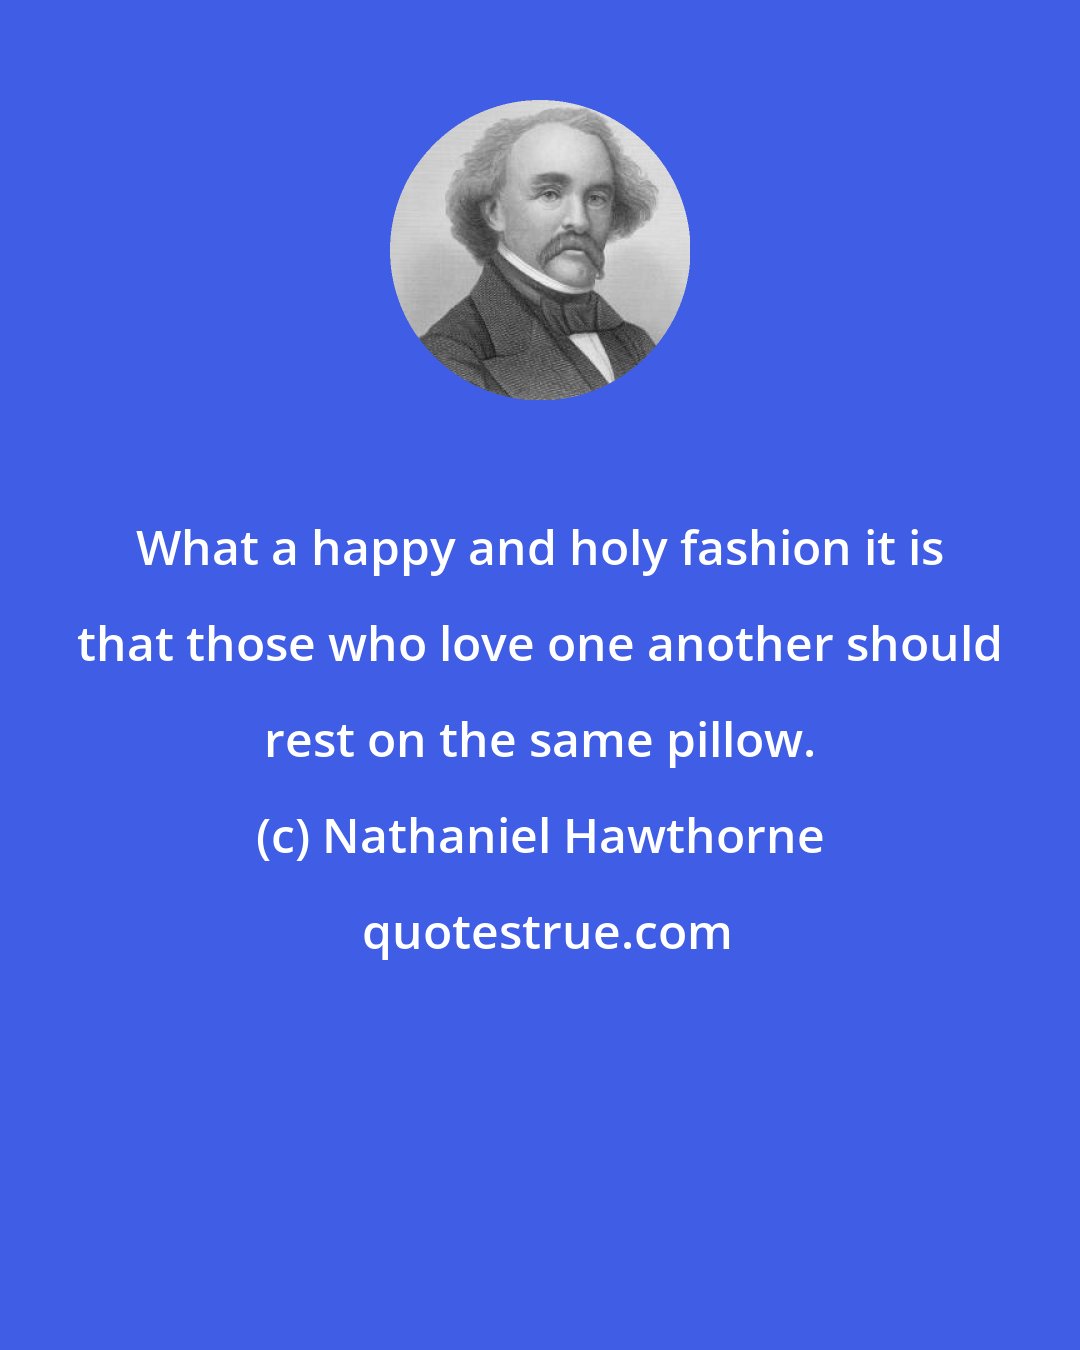 Nathaniel Hawthorne: What a happy and holy fashion it is that those who love one another should rest on the same pillow.